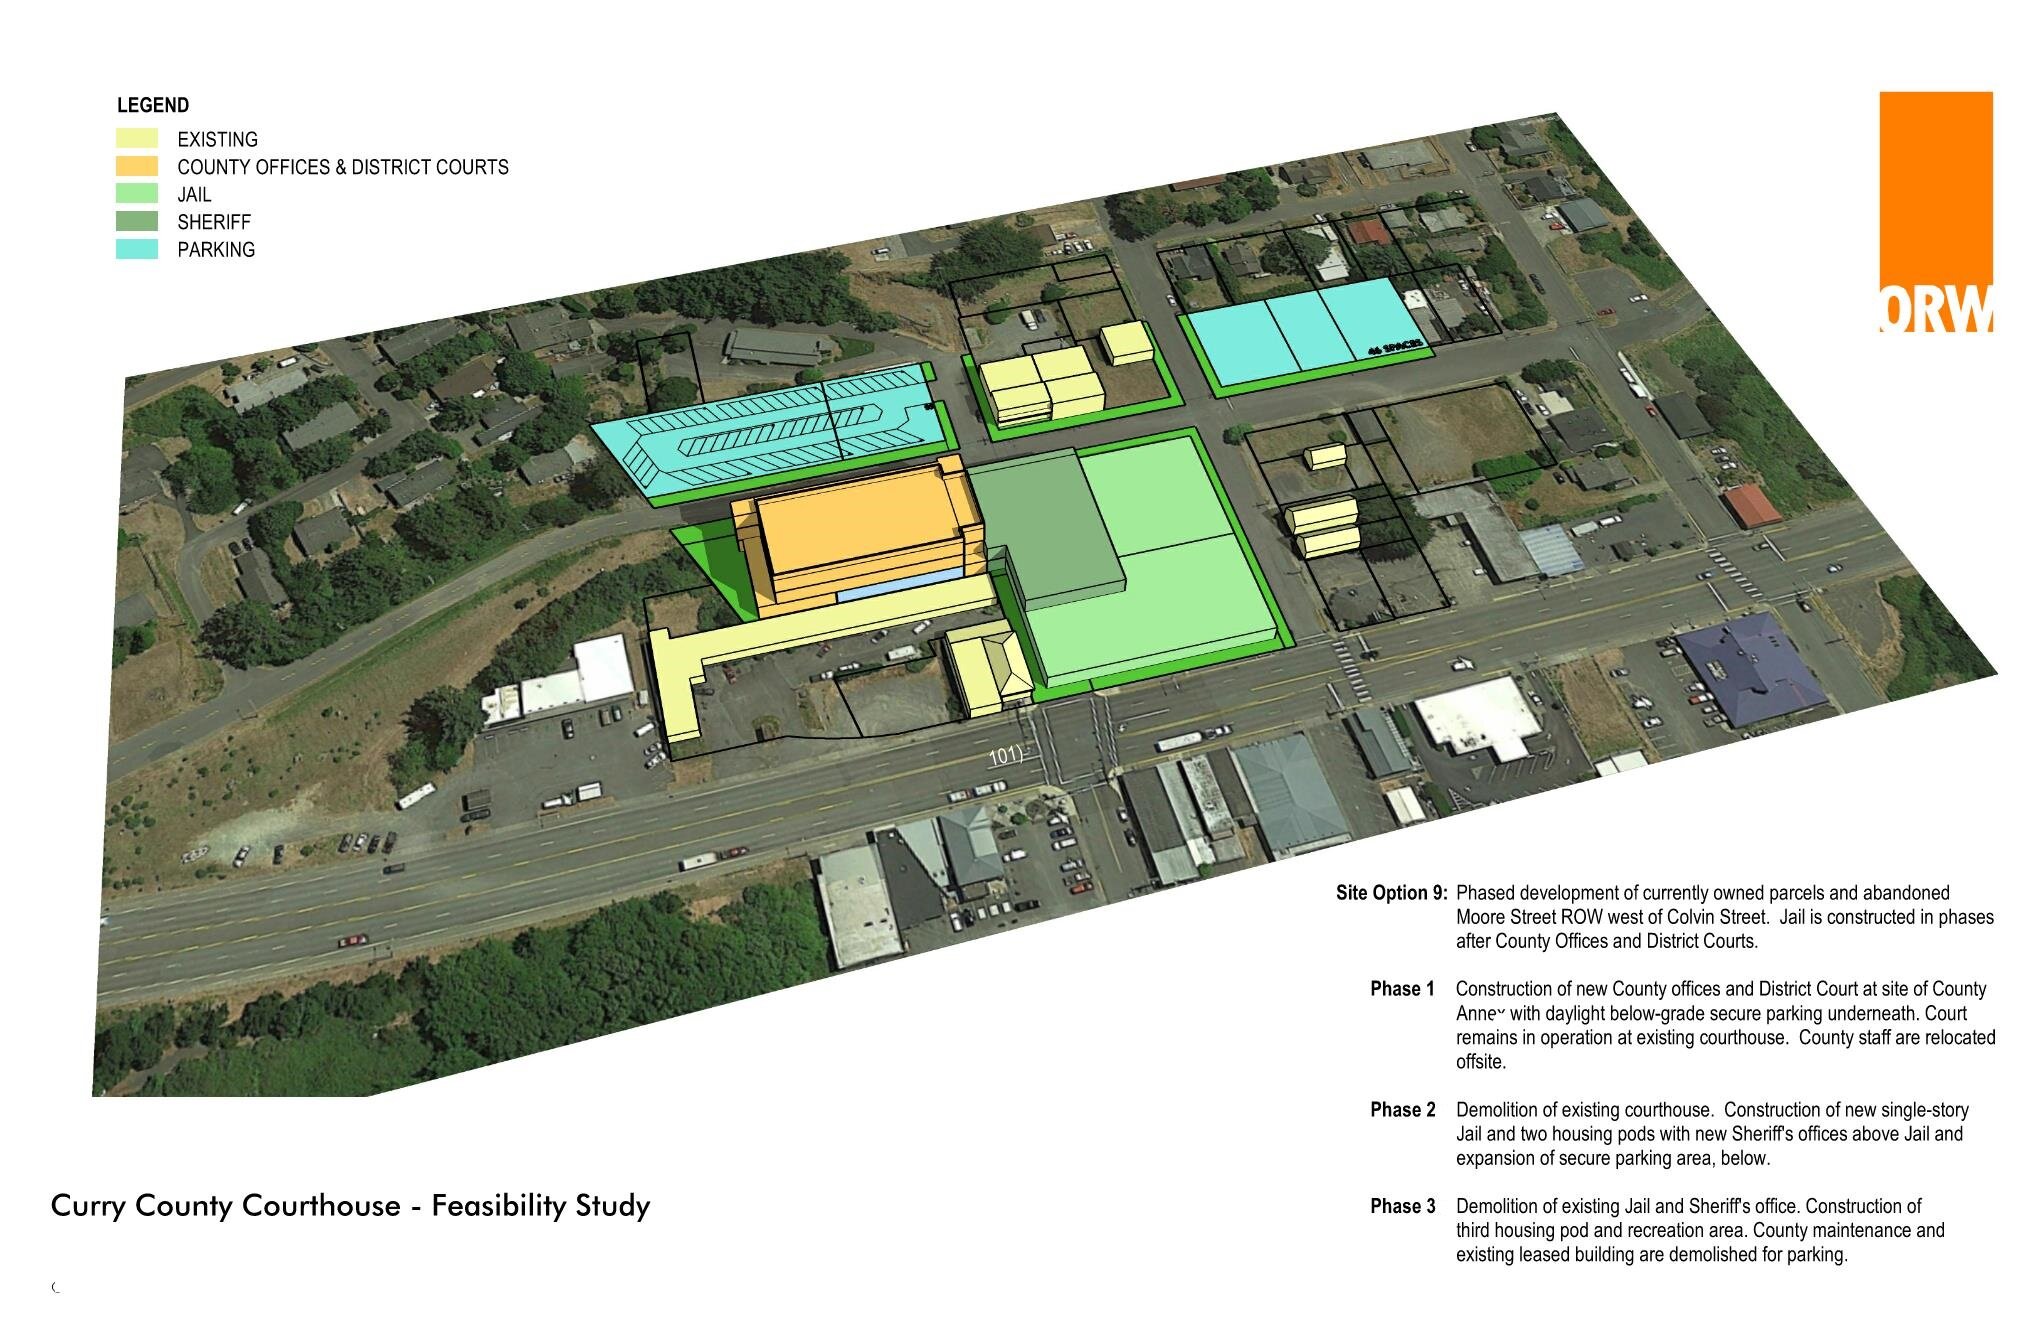 CURRY COUNTY COURTHOUSE FEASIBILITY STUDY